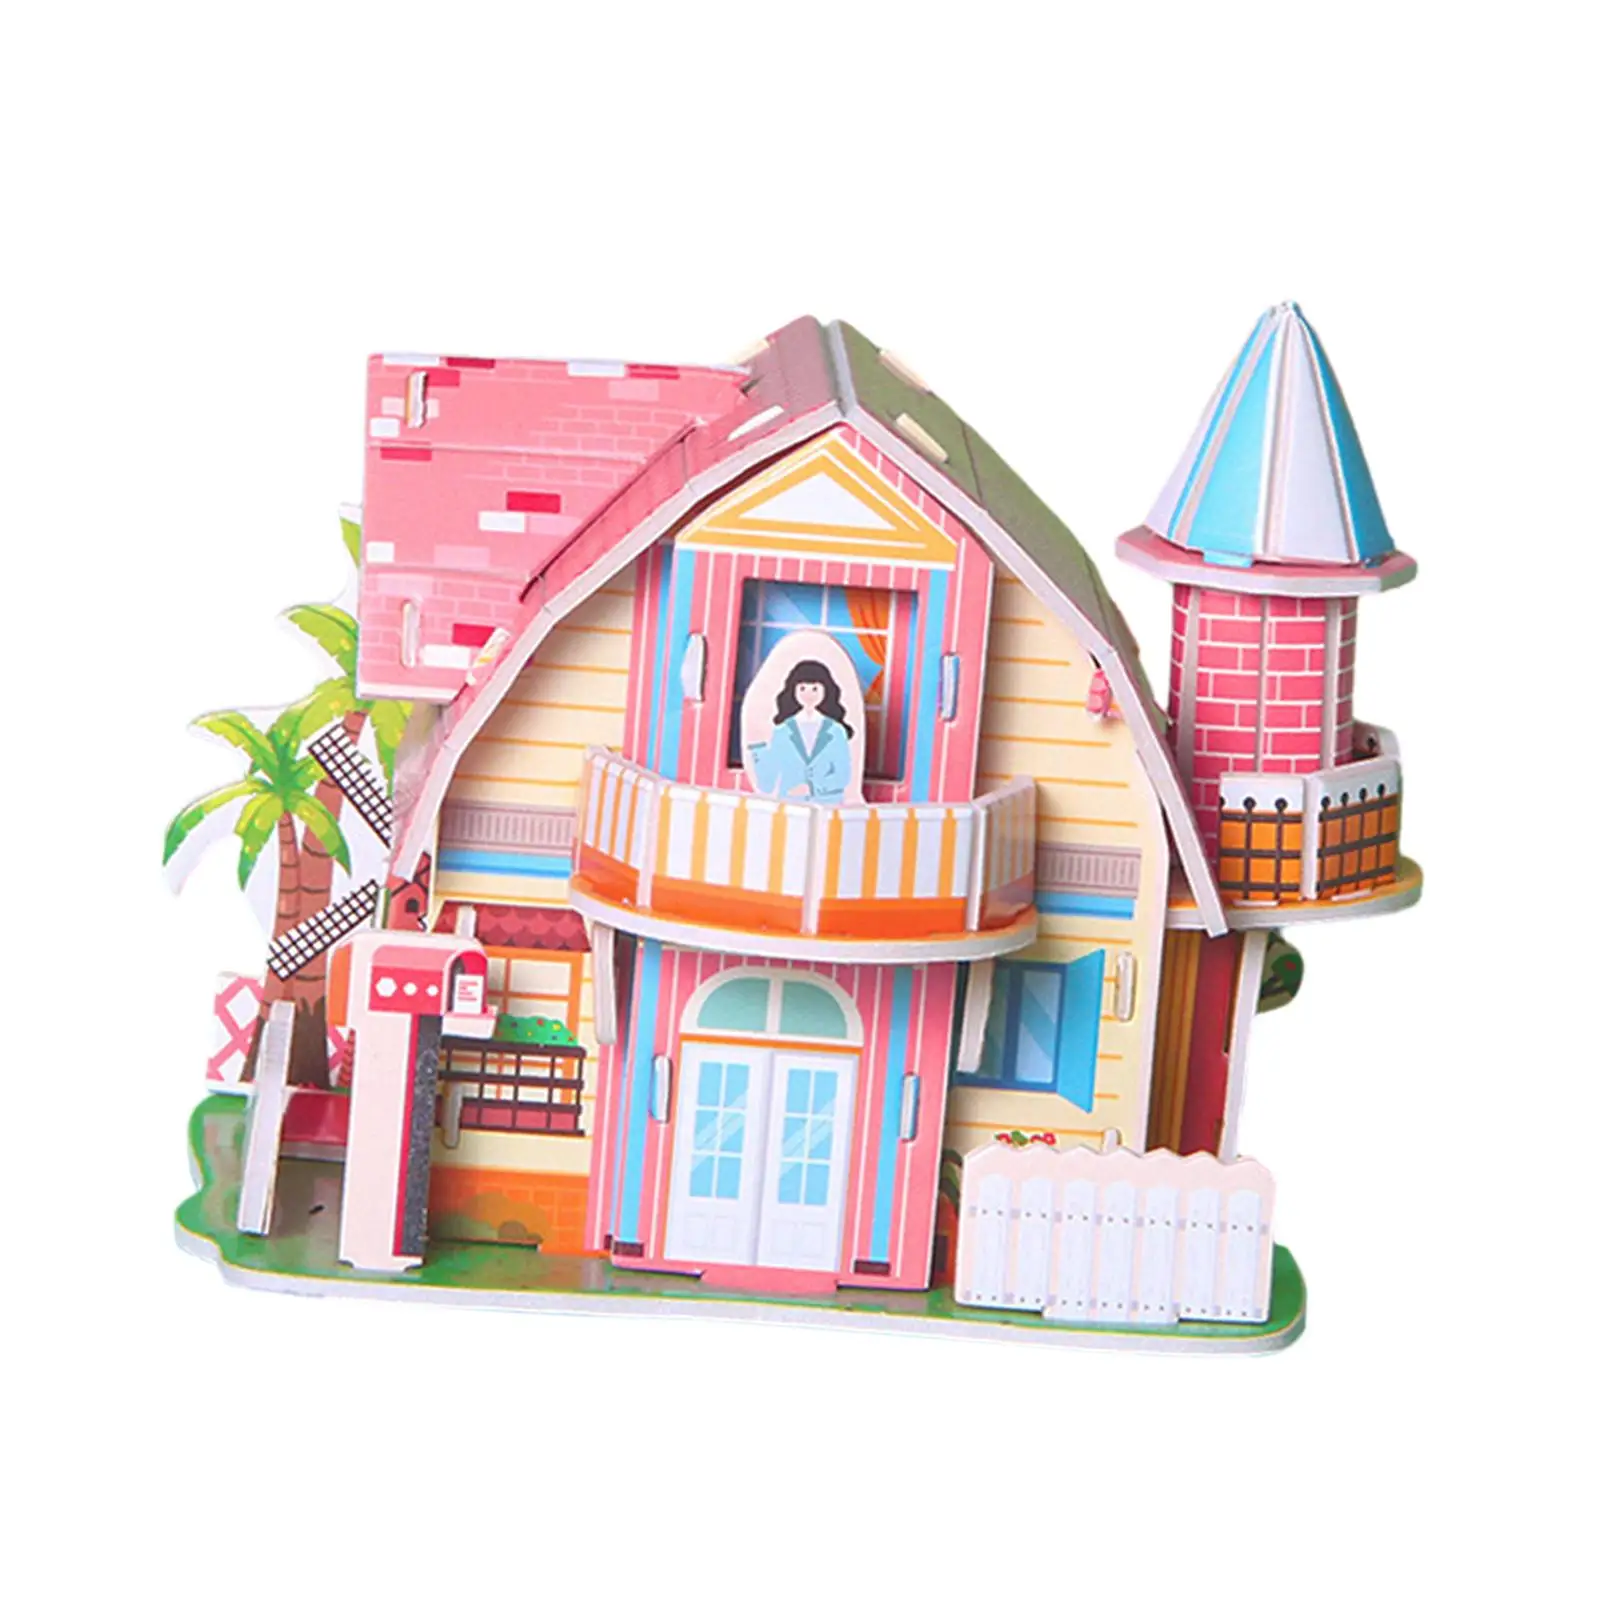 DIY 3D Jigsaw Puzzle Toys Happy House for Decorative Unique Gifts Home Decor